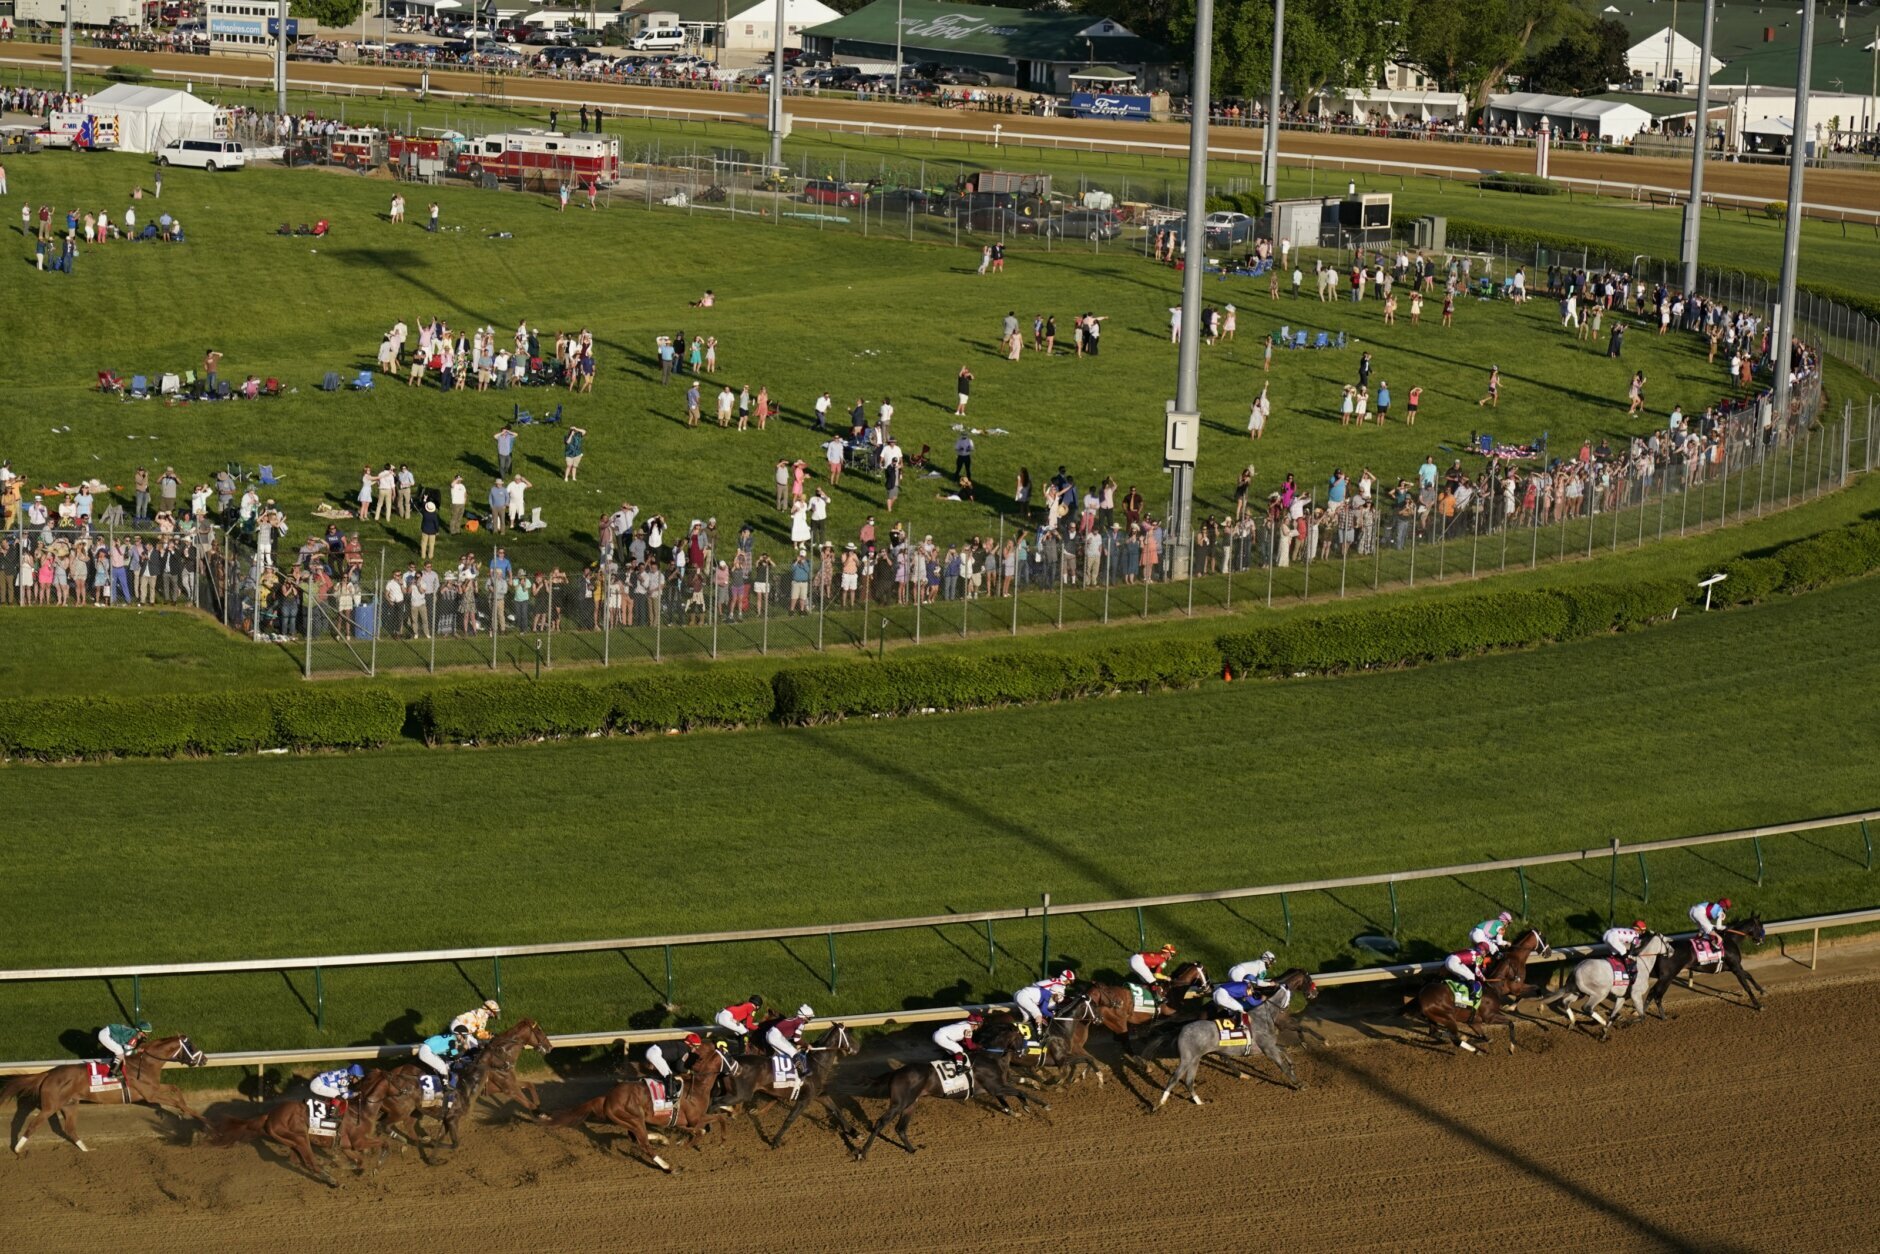 Medina Spirit, right, with John Velazquez aboard, leads the field around the first turn on the way to winning the 147th running of the Kentucky Derby at Churchill Downs, Saturday, May 1, 2021, in Louisville, Ky. (AP Photo/Charlie Riedel)